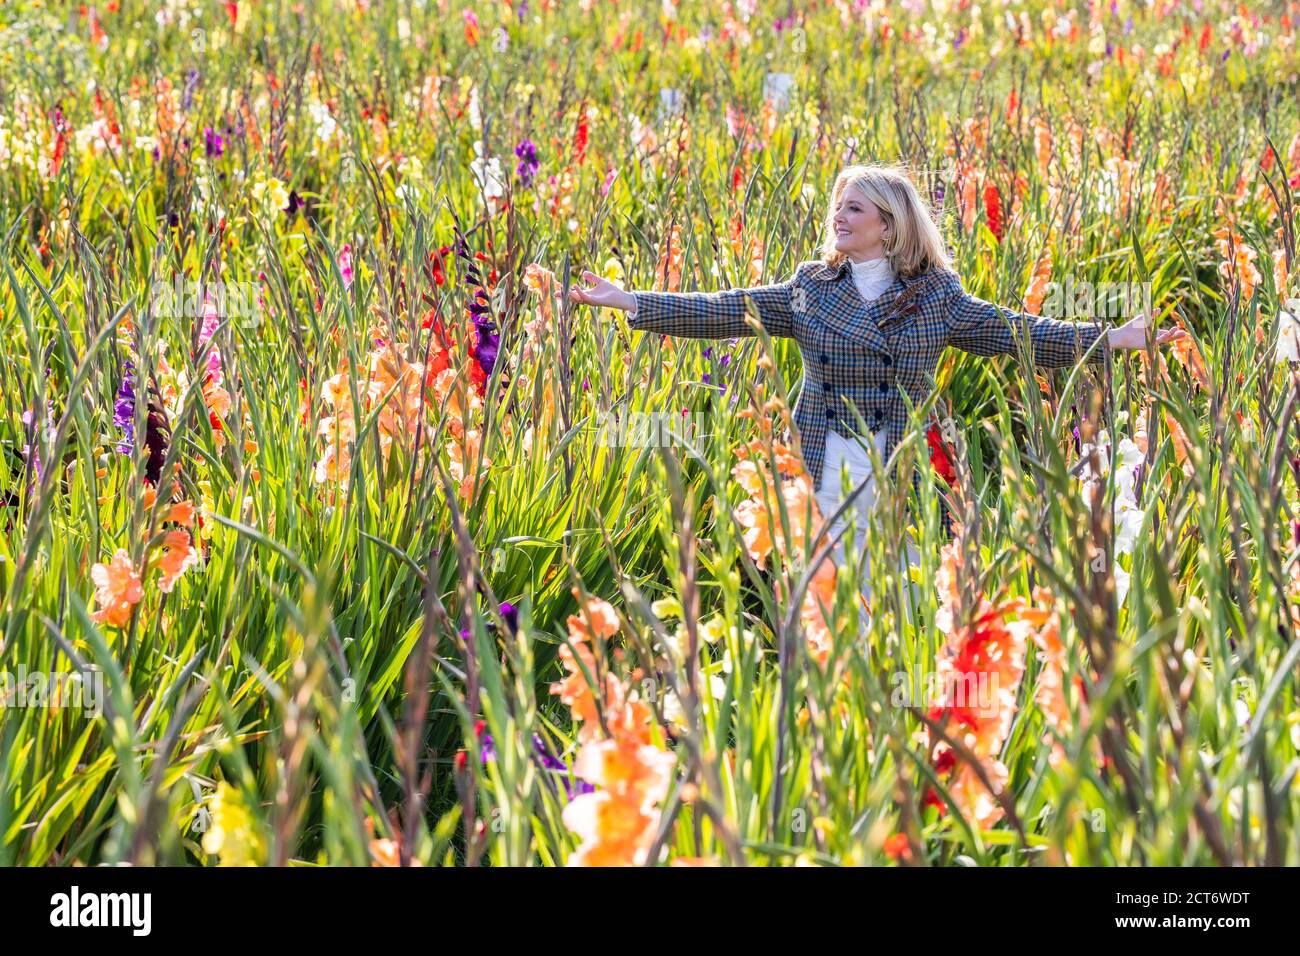 Singer, song-writer and broadcaster Fiona Kennedy launches an appeal for this year's #iSing4Peace, on World Peace Day, from the Flower Field at Laurencekirk, Aberdeenshire. Stock Photo